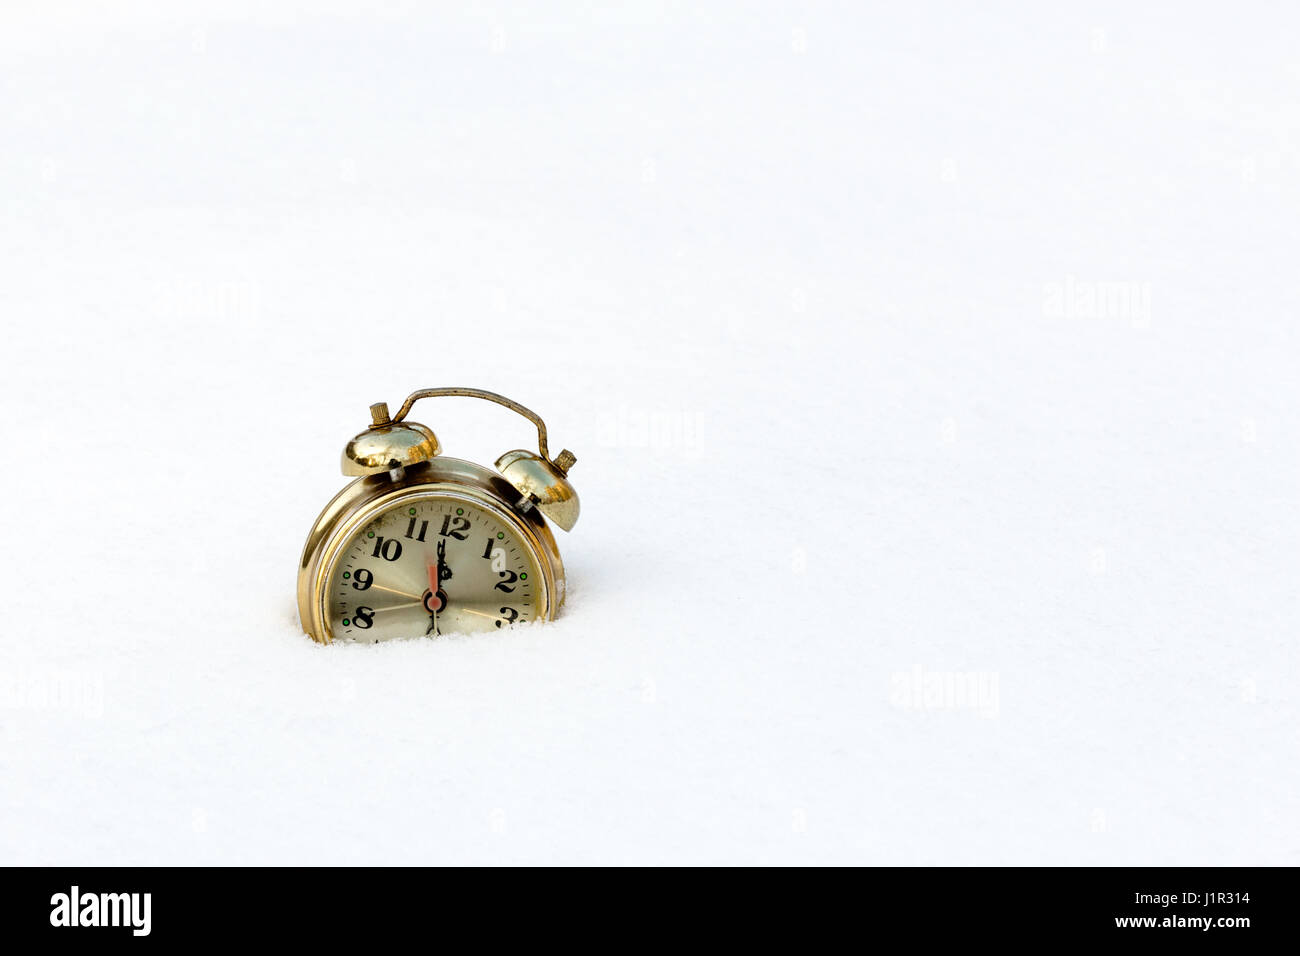 old clock in the pure white snow Stock Photo